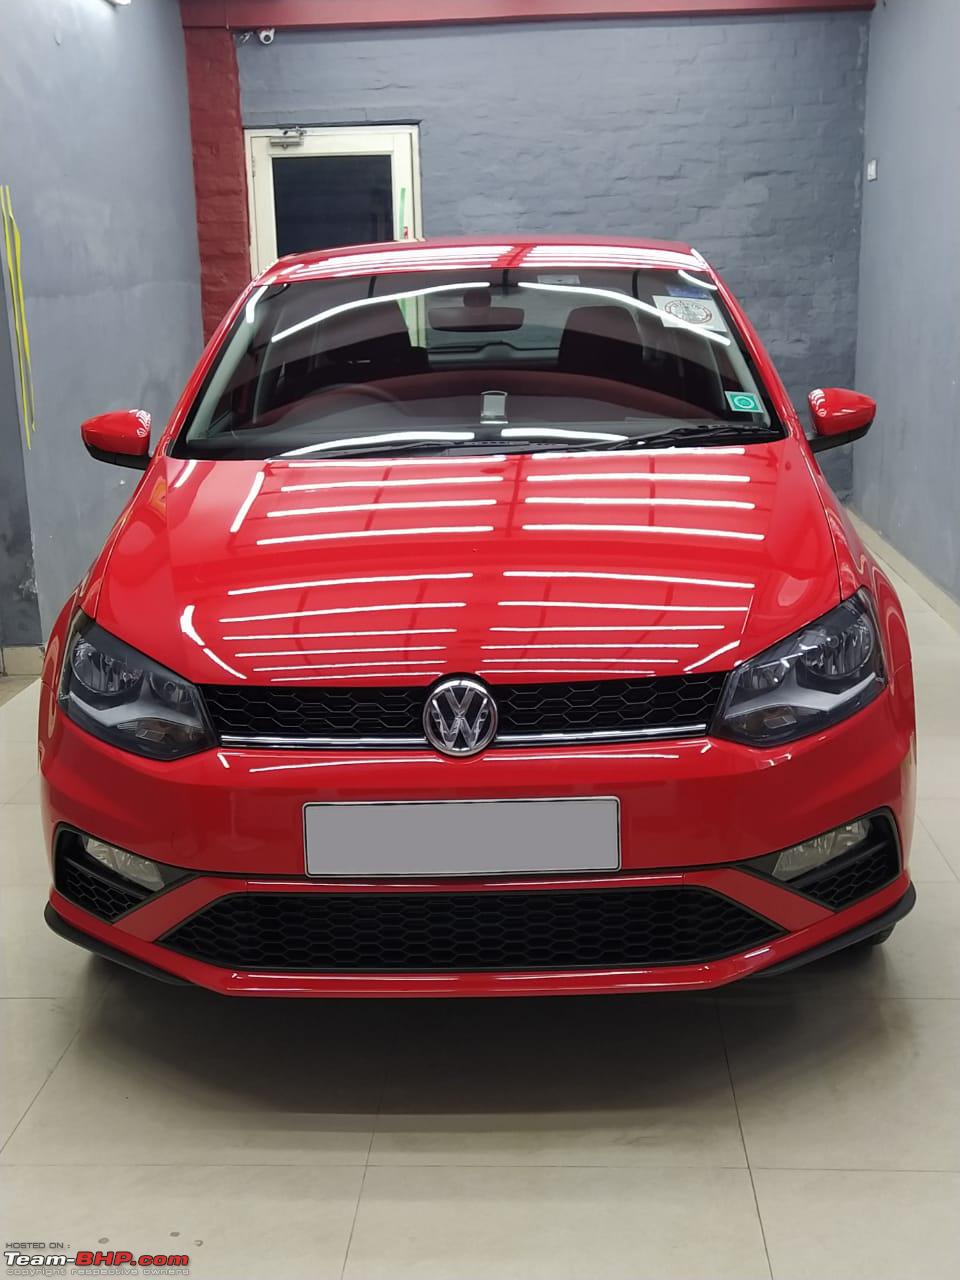 4-months with a Volkswagen Polo 1.0 TSI - Team-BHP